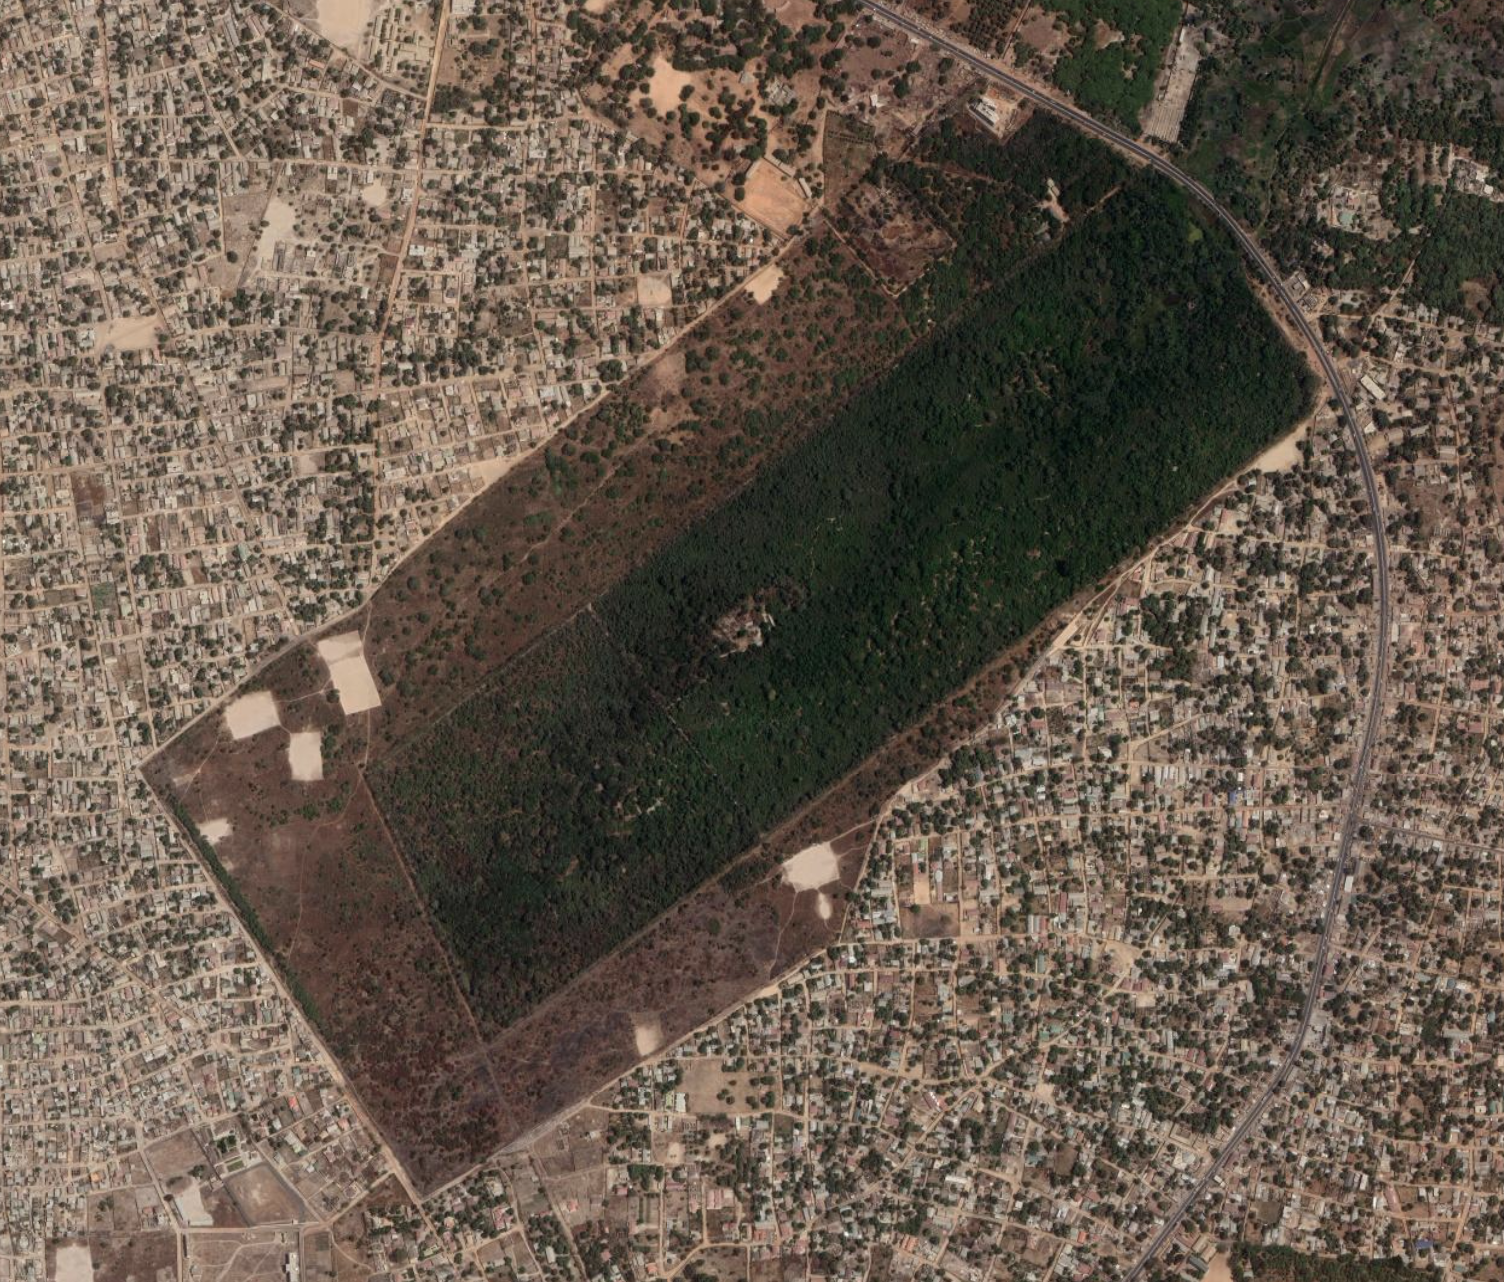 Aerial photograph of Abuko Nature Preserve with a rectangle of dark green, dense forest in the middle, surrounded by brown scrublands, which are surrounded by a dense residential area with minimal green space.